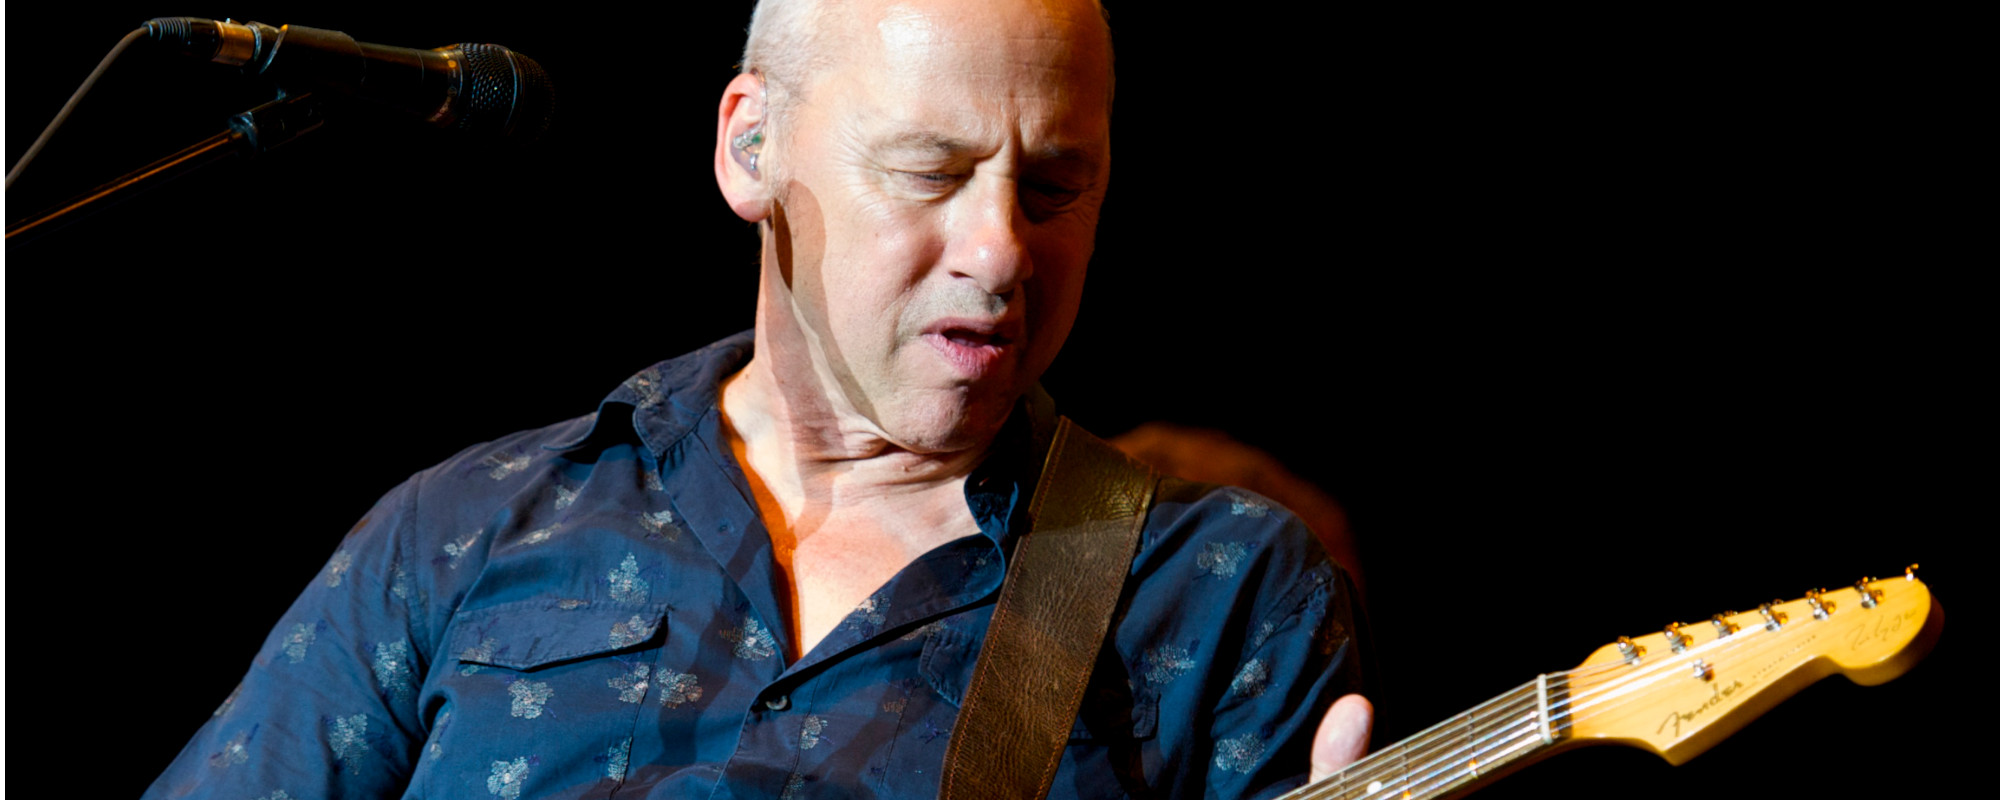 Bruce Springsteen, Brian May, Slash, and More Team Up for Star Studded Re-Release of Mark Knopfler’s "Going Home"